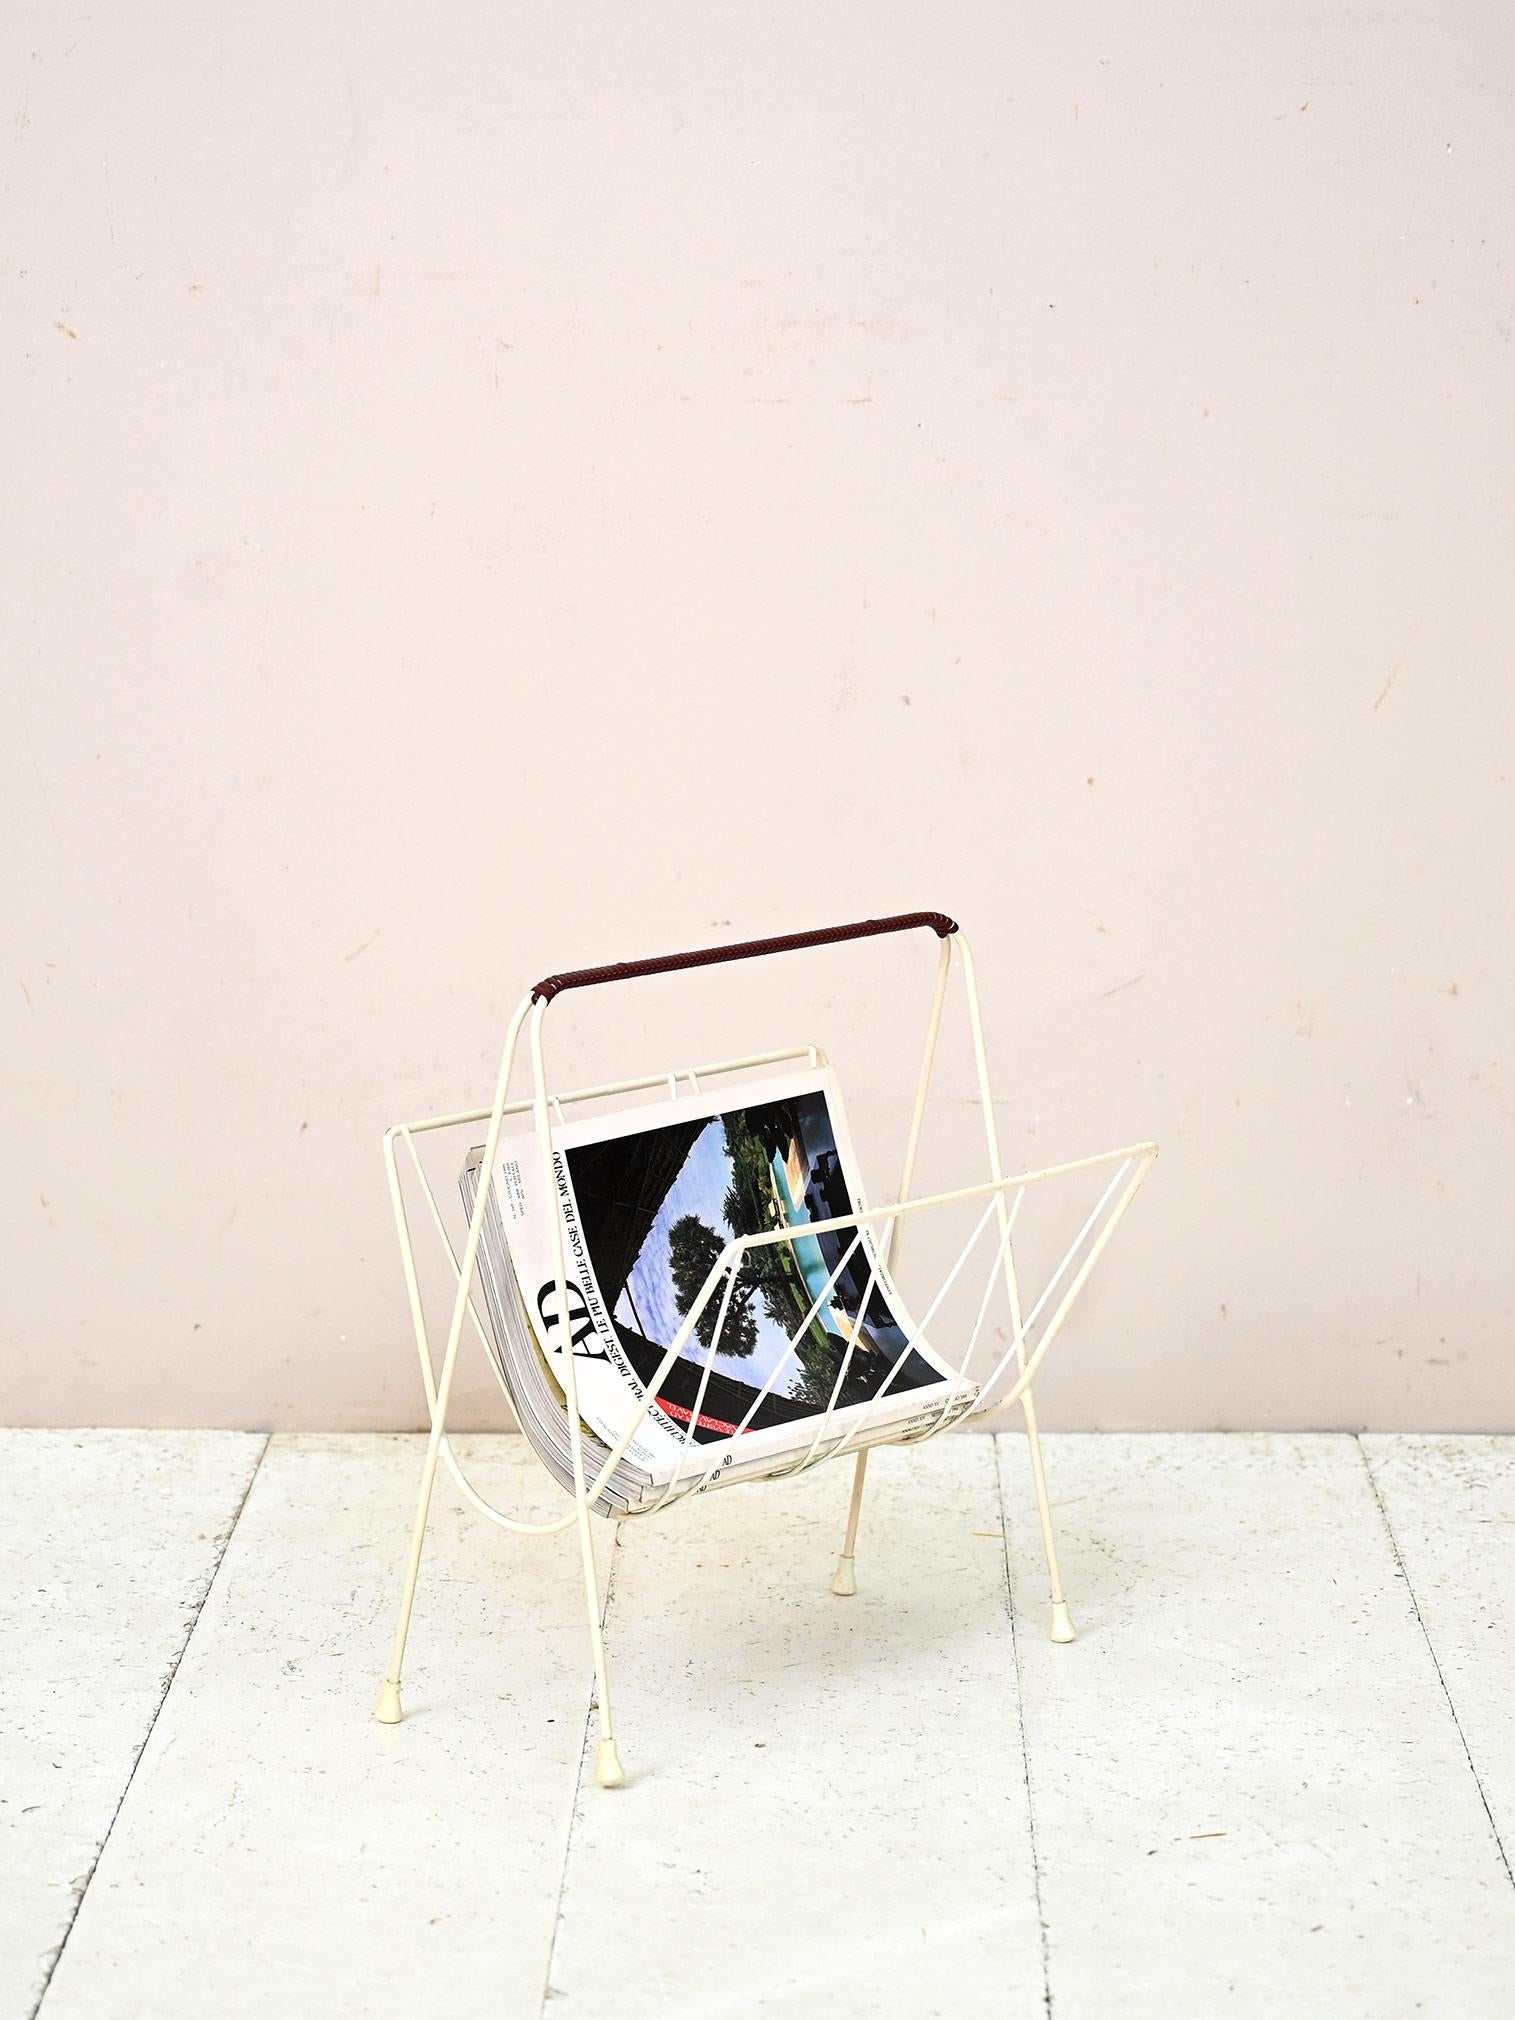 1960s magazine rack made of curved white metal.

This original Scandinavian furniture accessory dates from the early 1960s. Made of curved tubular metal and lacquered white. The practical handle is covered with woven plastic rope. 

Good